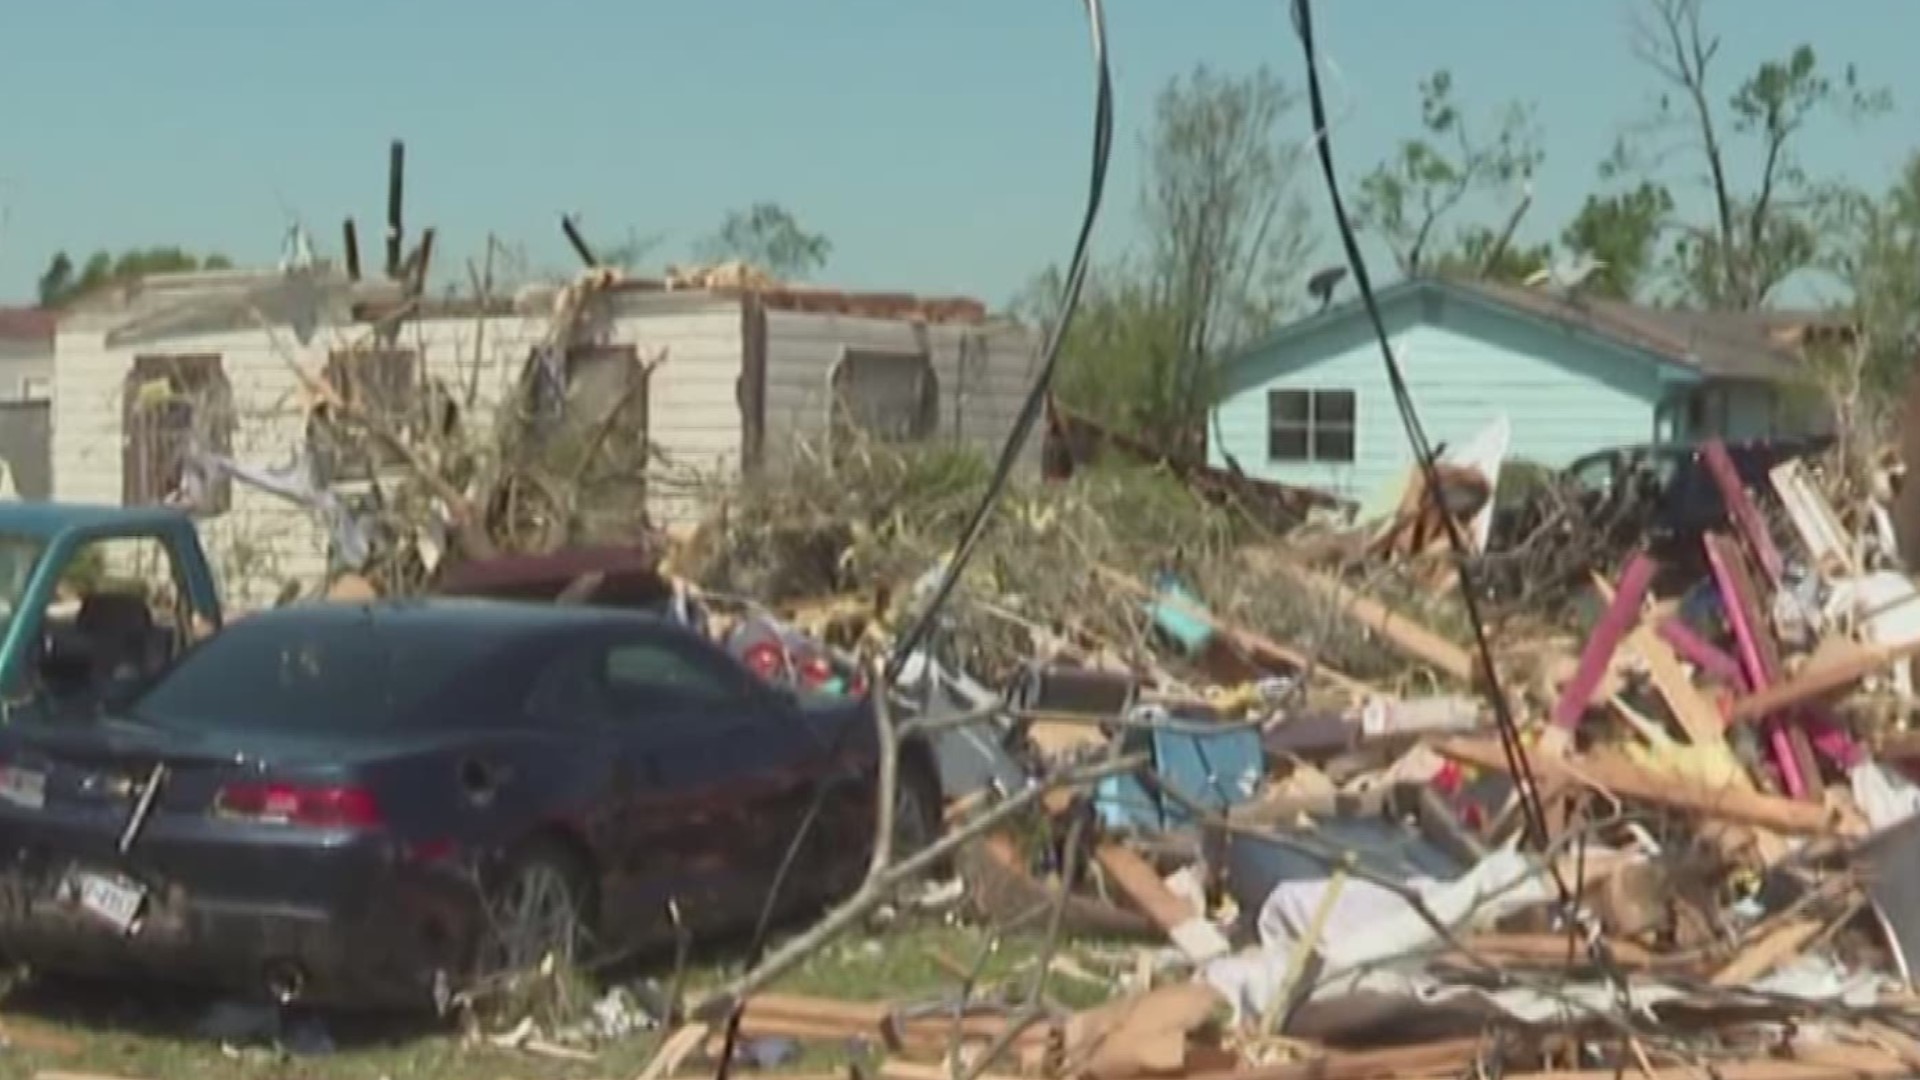 After an EF-3 tornado ripped through the town of Franklin, TX over the weekend, here's what you should know about getting involved in the recovery effort, and ways the community will move forward.